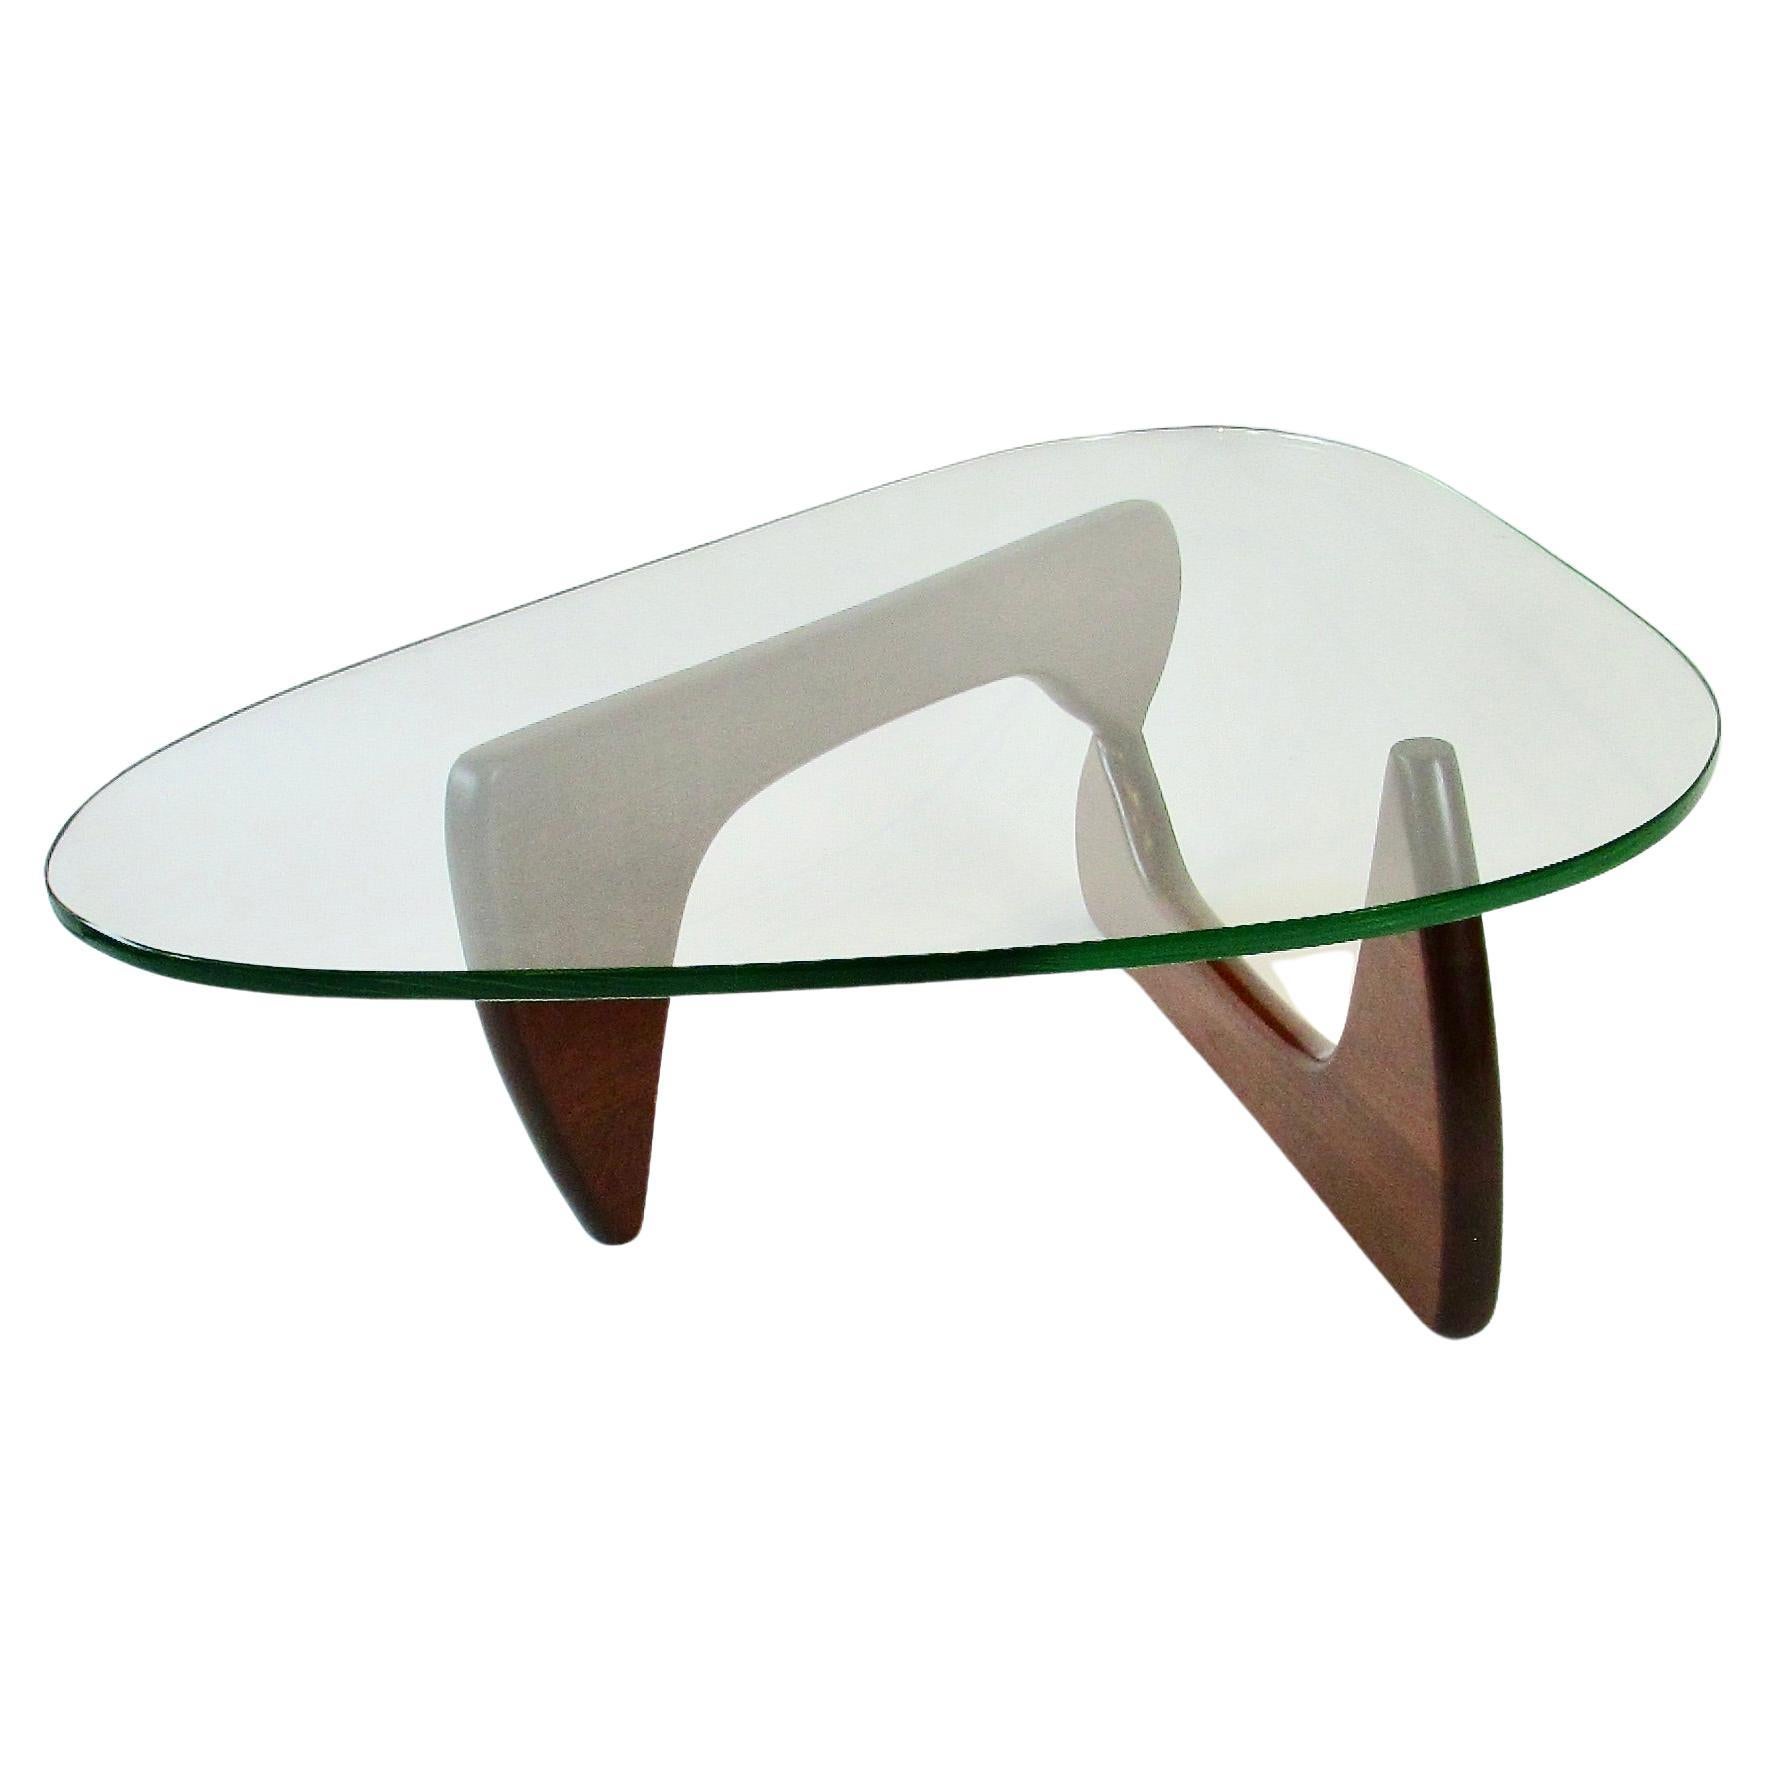 How much does a Noguchi table weigh?